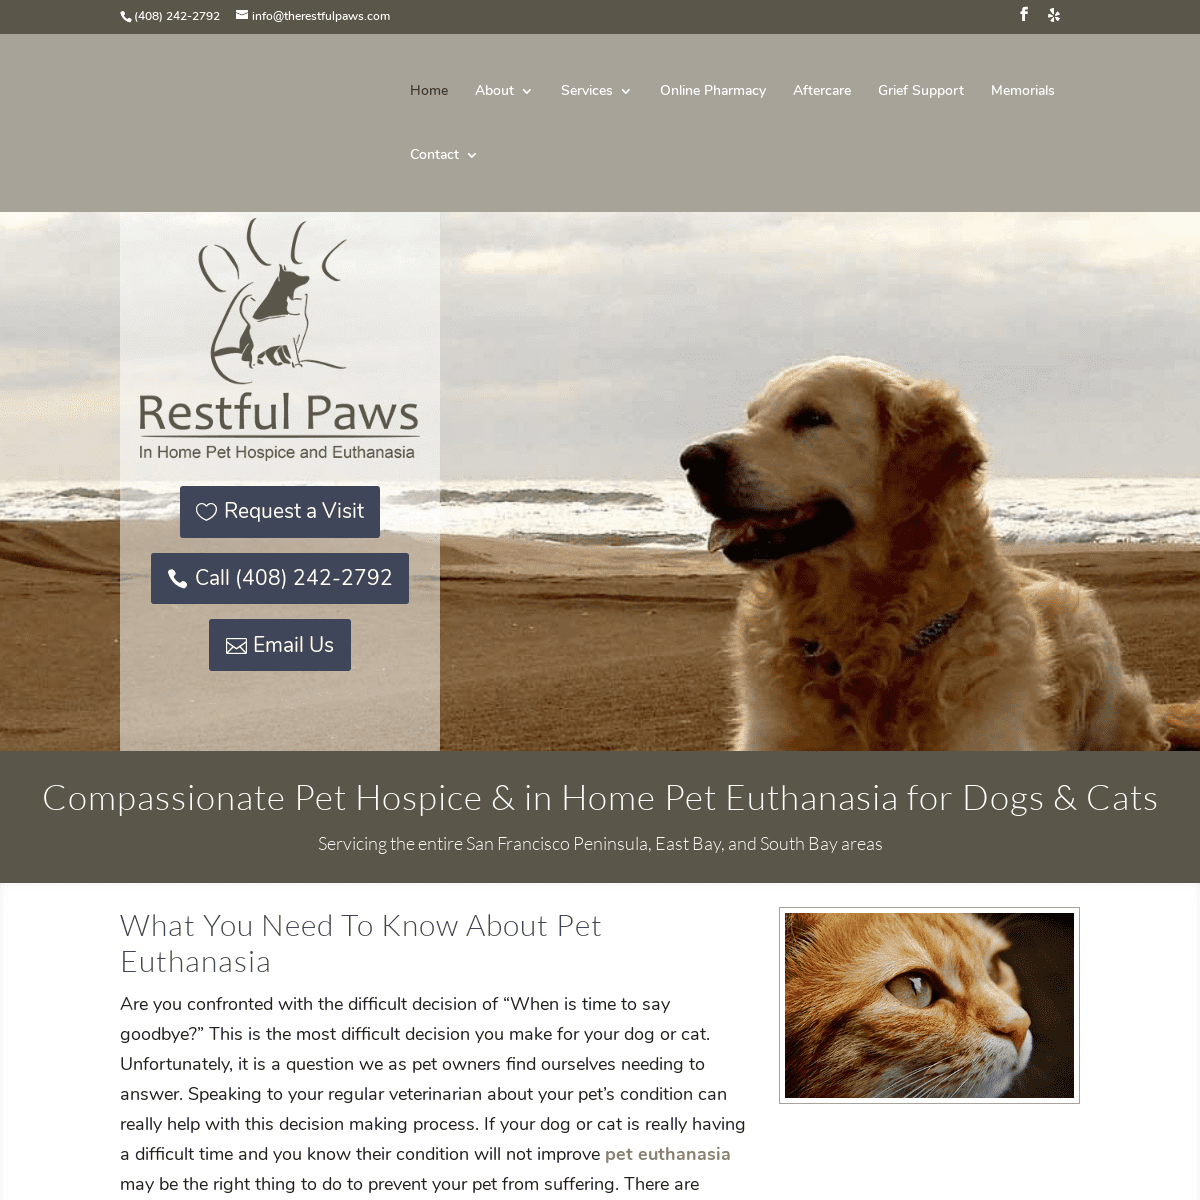 Restful Paws - In Home Pet Hospice and Euthanasia